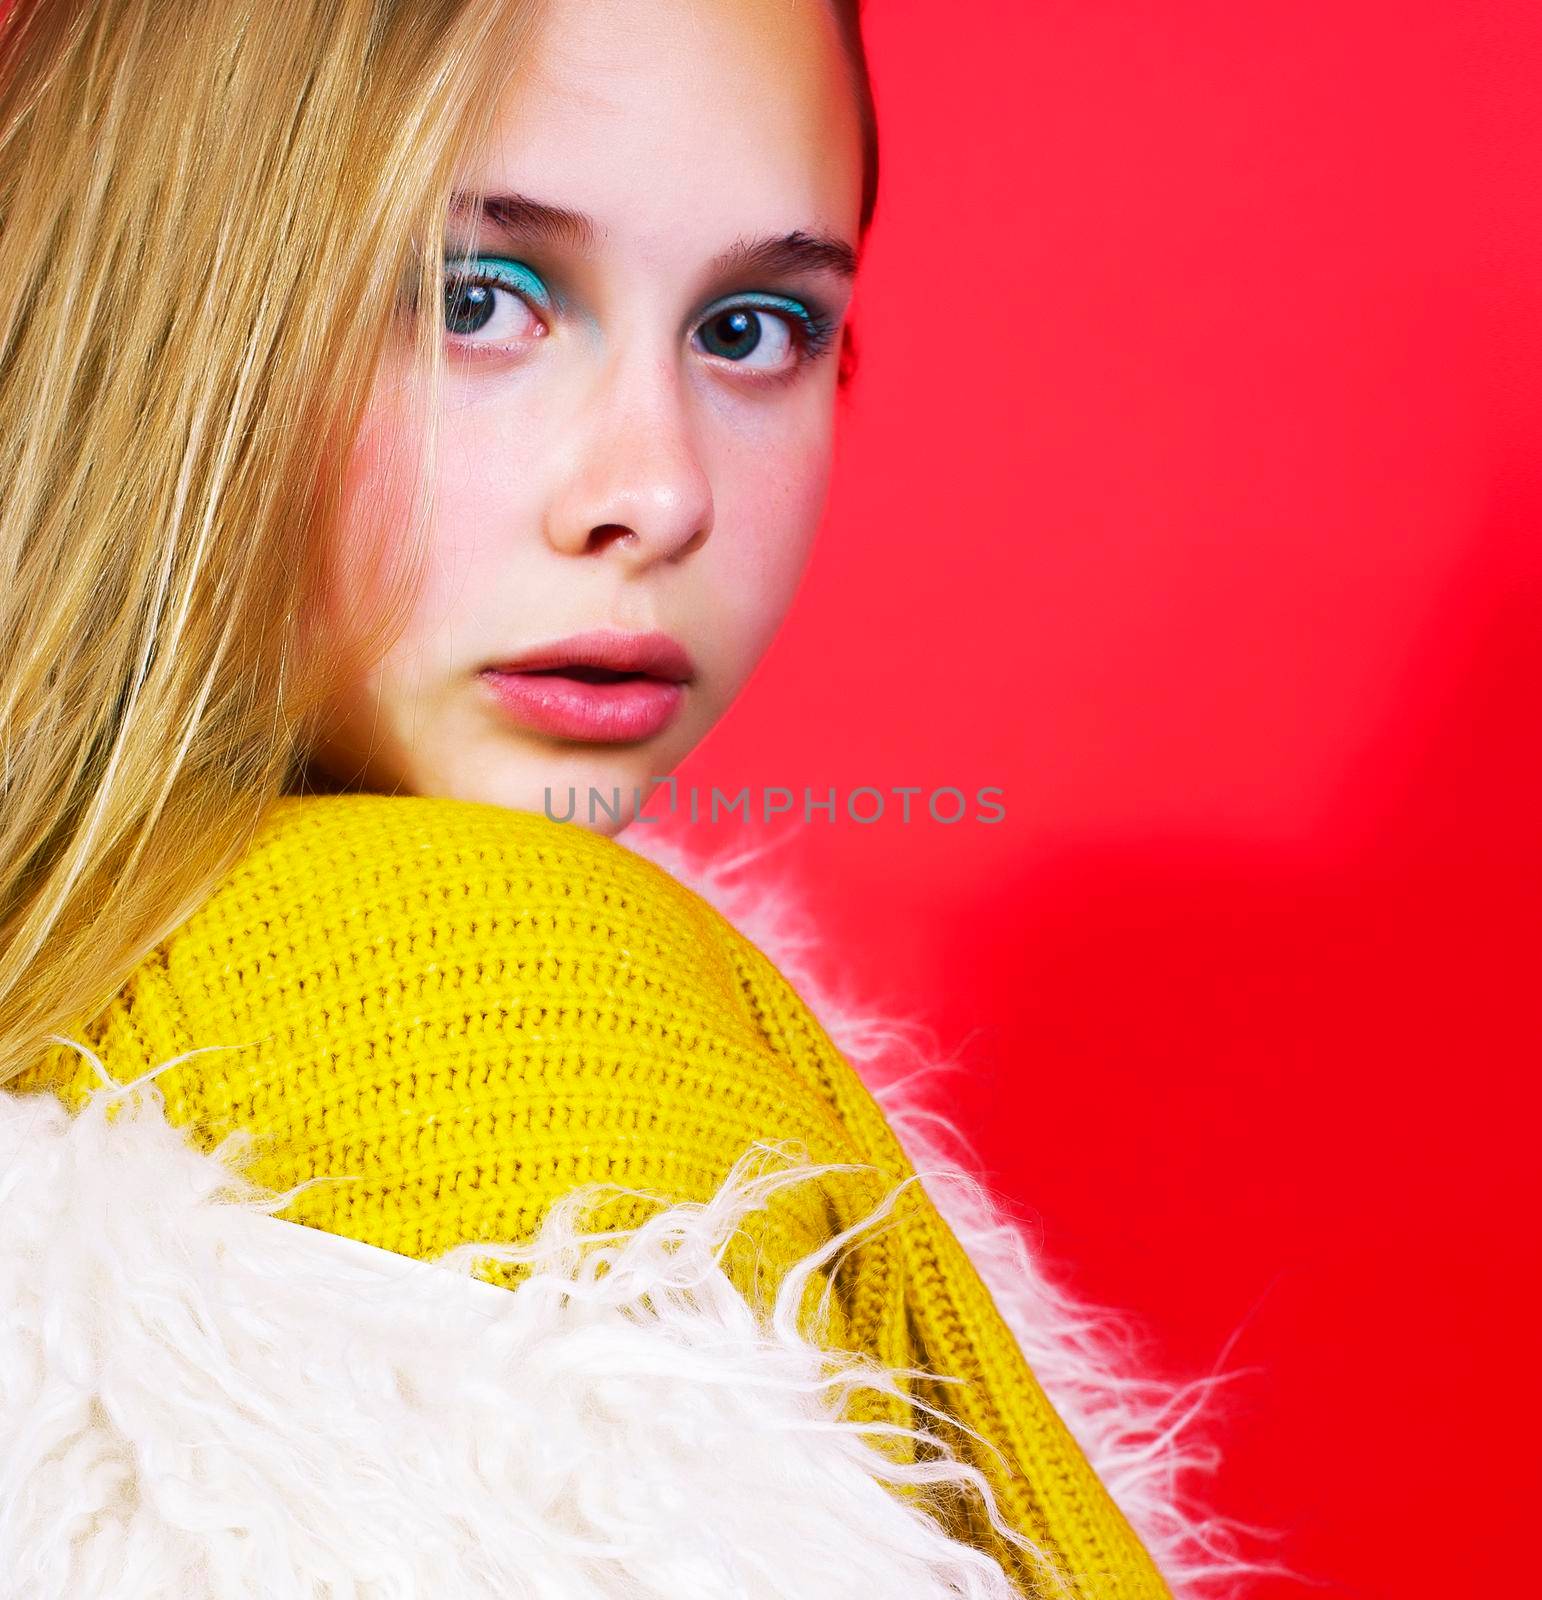 young pretty emitonal posing teenage girl on bright red background, happy smiling lifestyle people concept by JordanJ